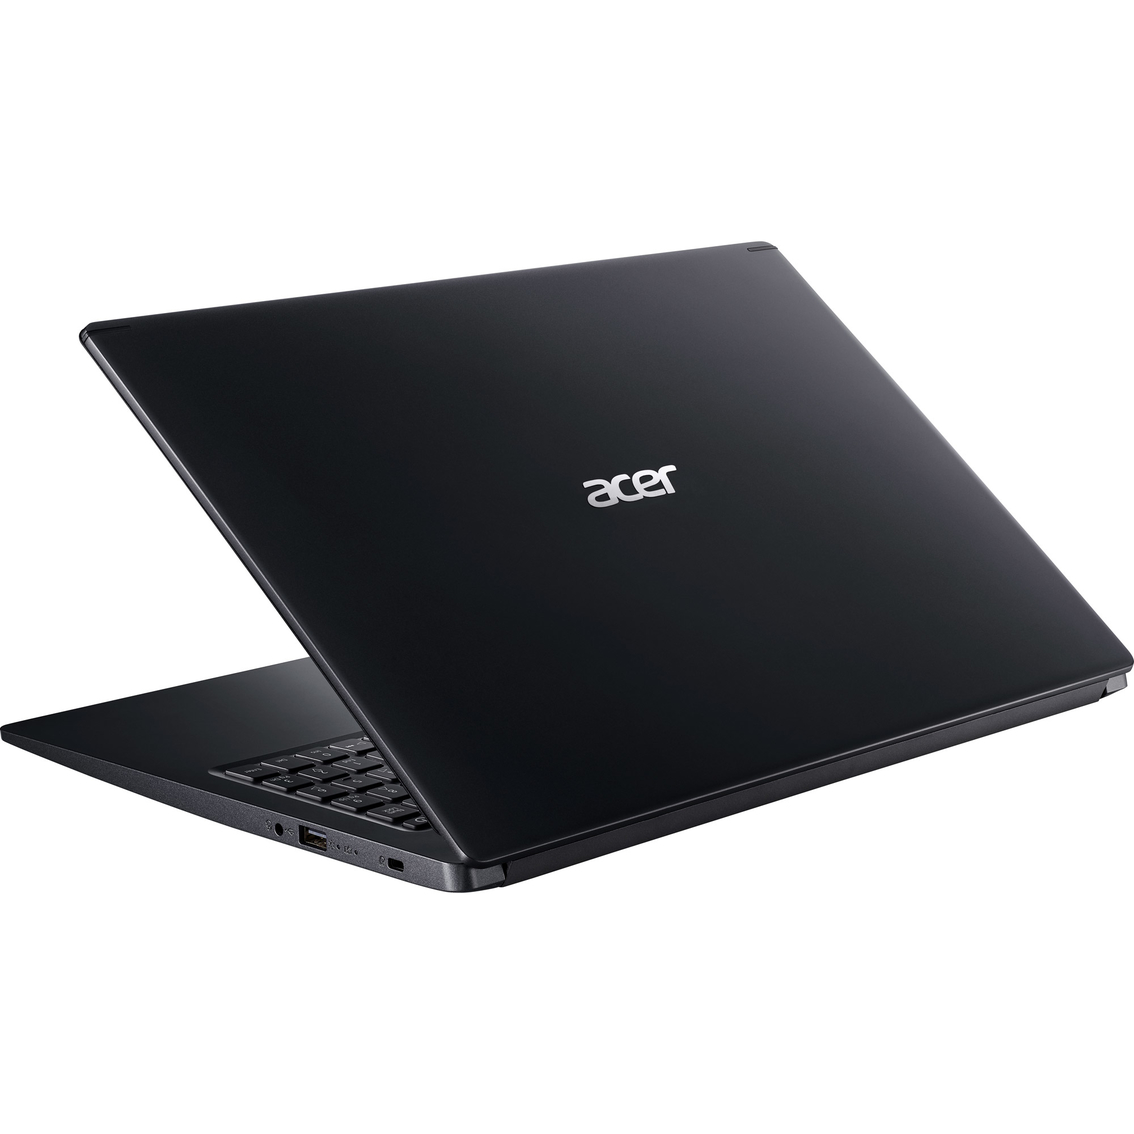 Acer Aspire 5 15.6 in. Intel Core i5 1GHz 8GB RAM 512GB SSD Touchscreen Notebook - Image 4 of 4